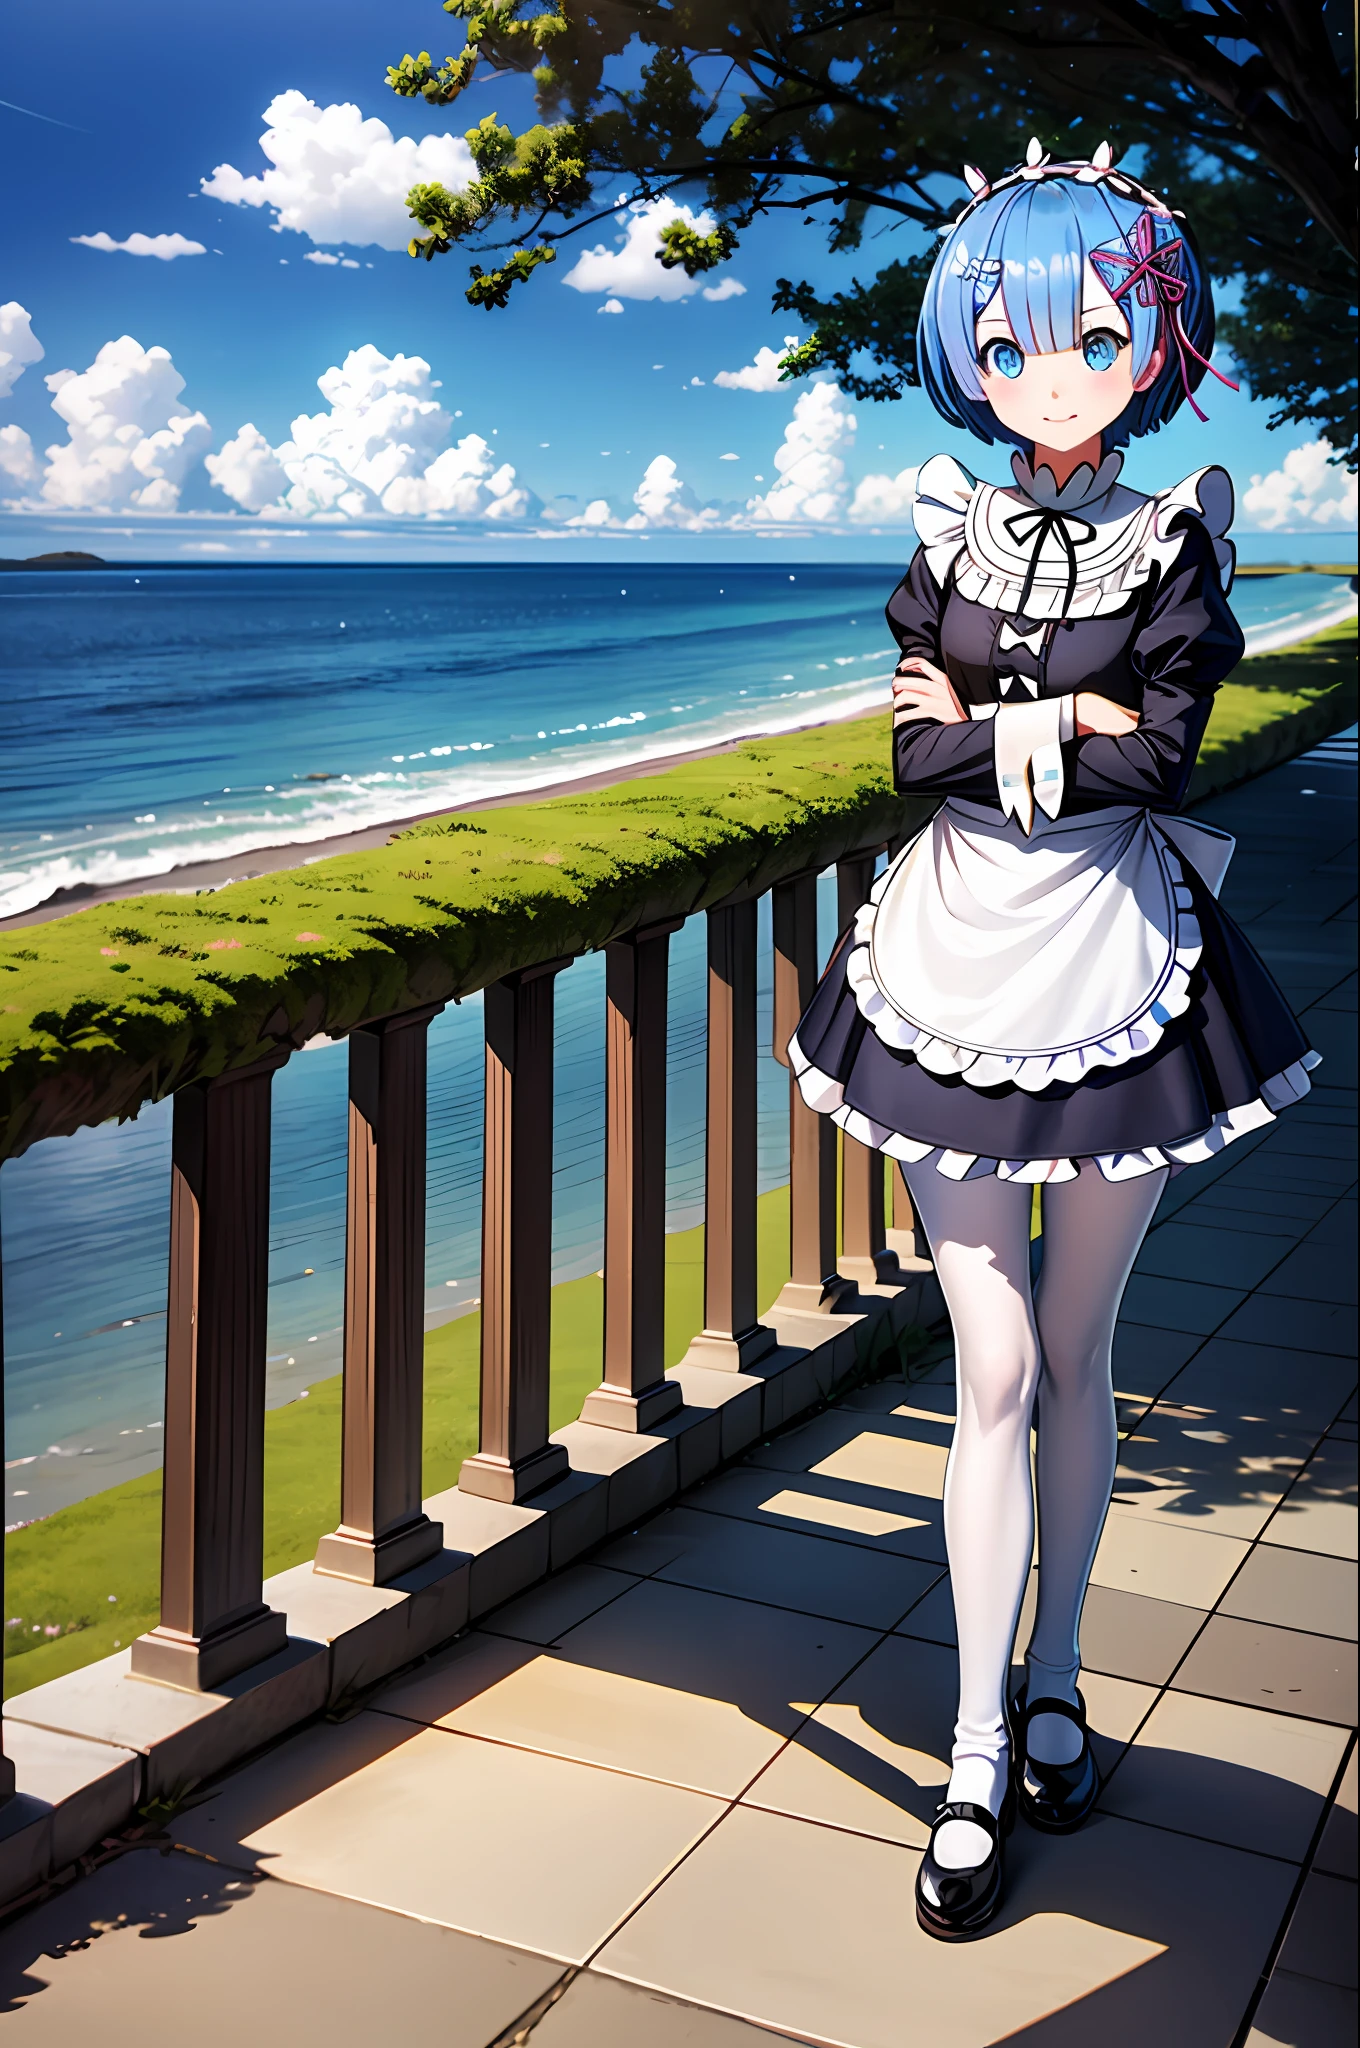 （tmasterpiece：2.0，best qualtiy），（Fine beautiful eyes：2.0），ph_rem，Remhd，1girll，Blue hair，solo，eBlue eyes，x hair accessories，legs ornaments，Bow knot，Long thick socks，lacepantyhose，Lolita heels，Lolita shoes，Rossvale Mansion maid uniform，full bodyesbian，Two hands，Two legs，Photo art，maidennurse，Skysky，the ocean，rays of sunshine，the trees，wave，